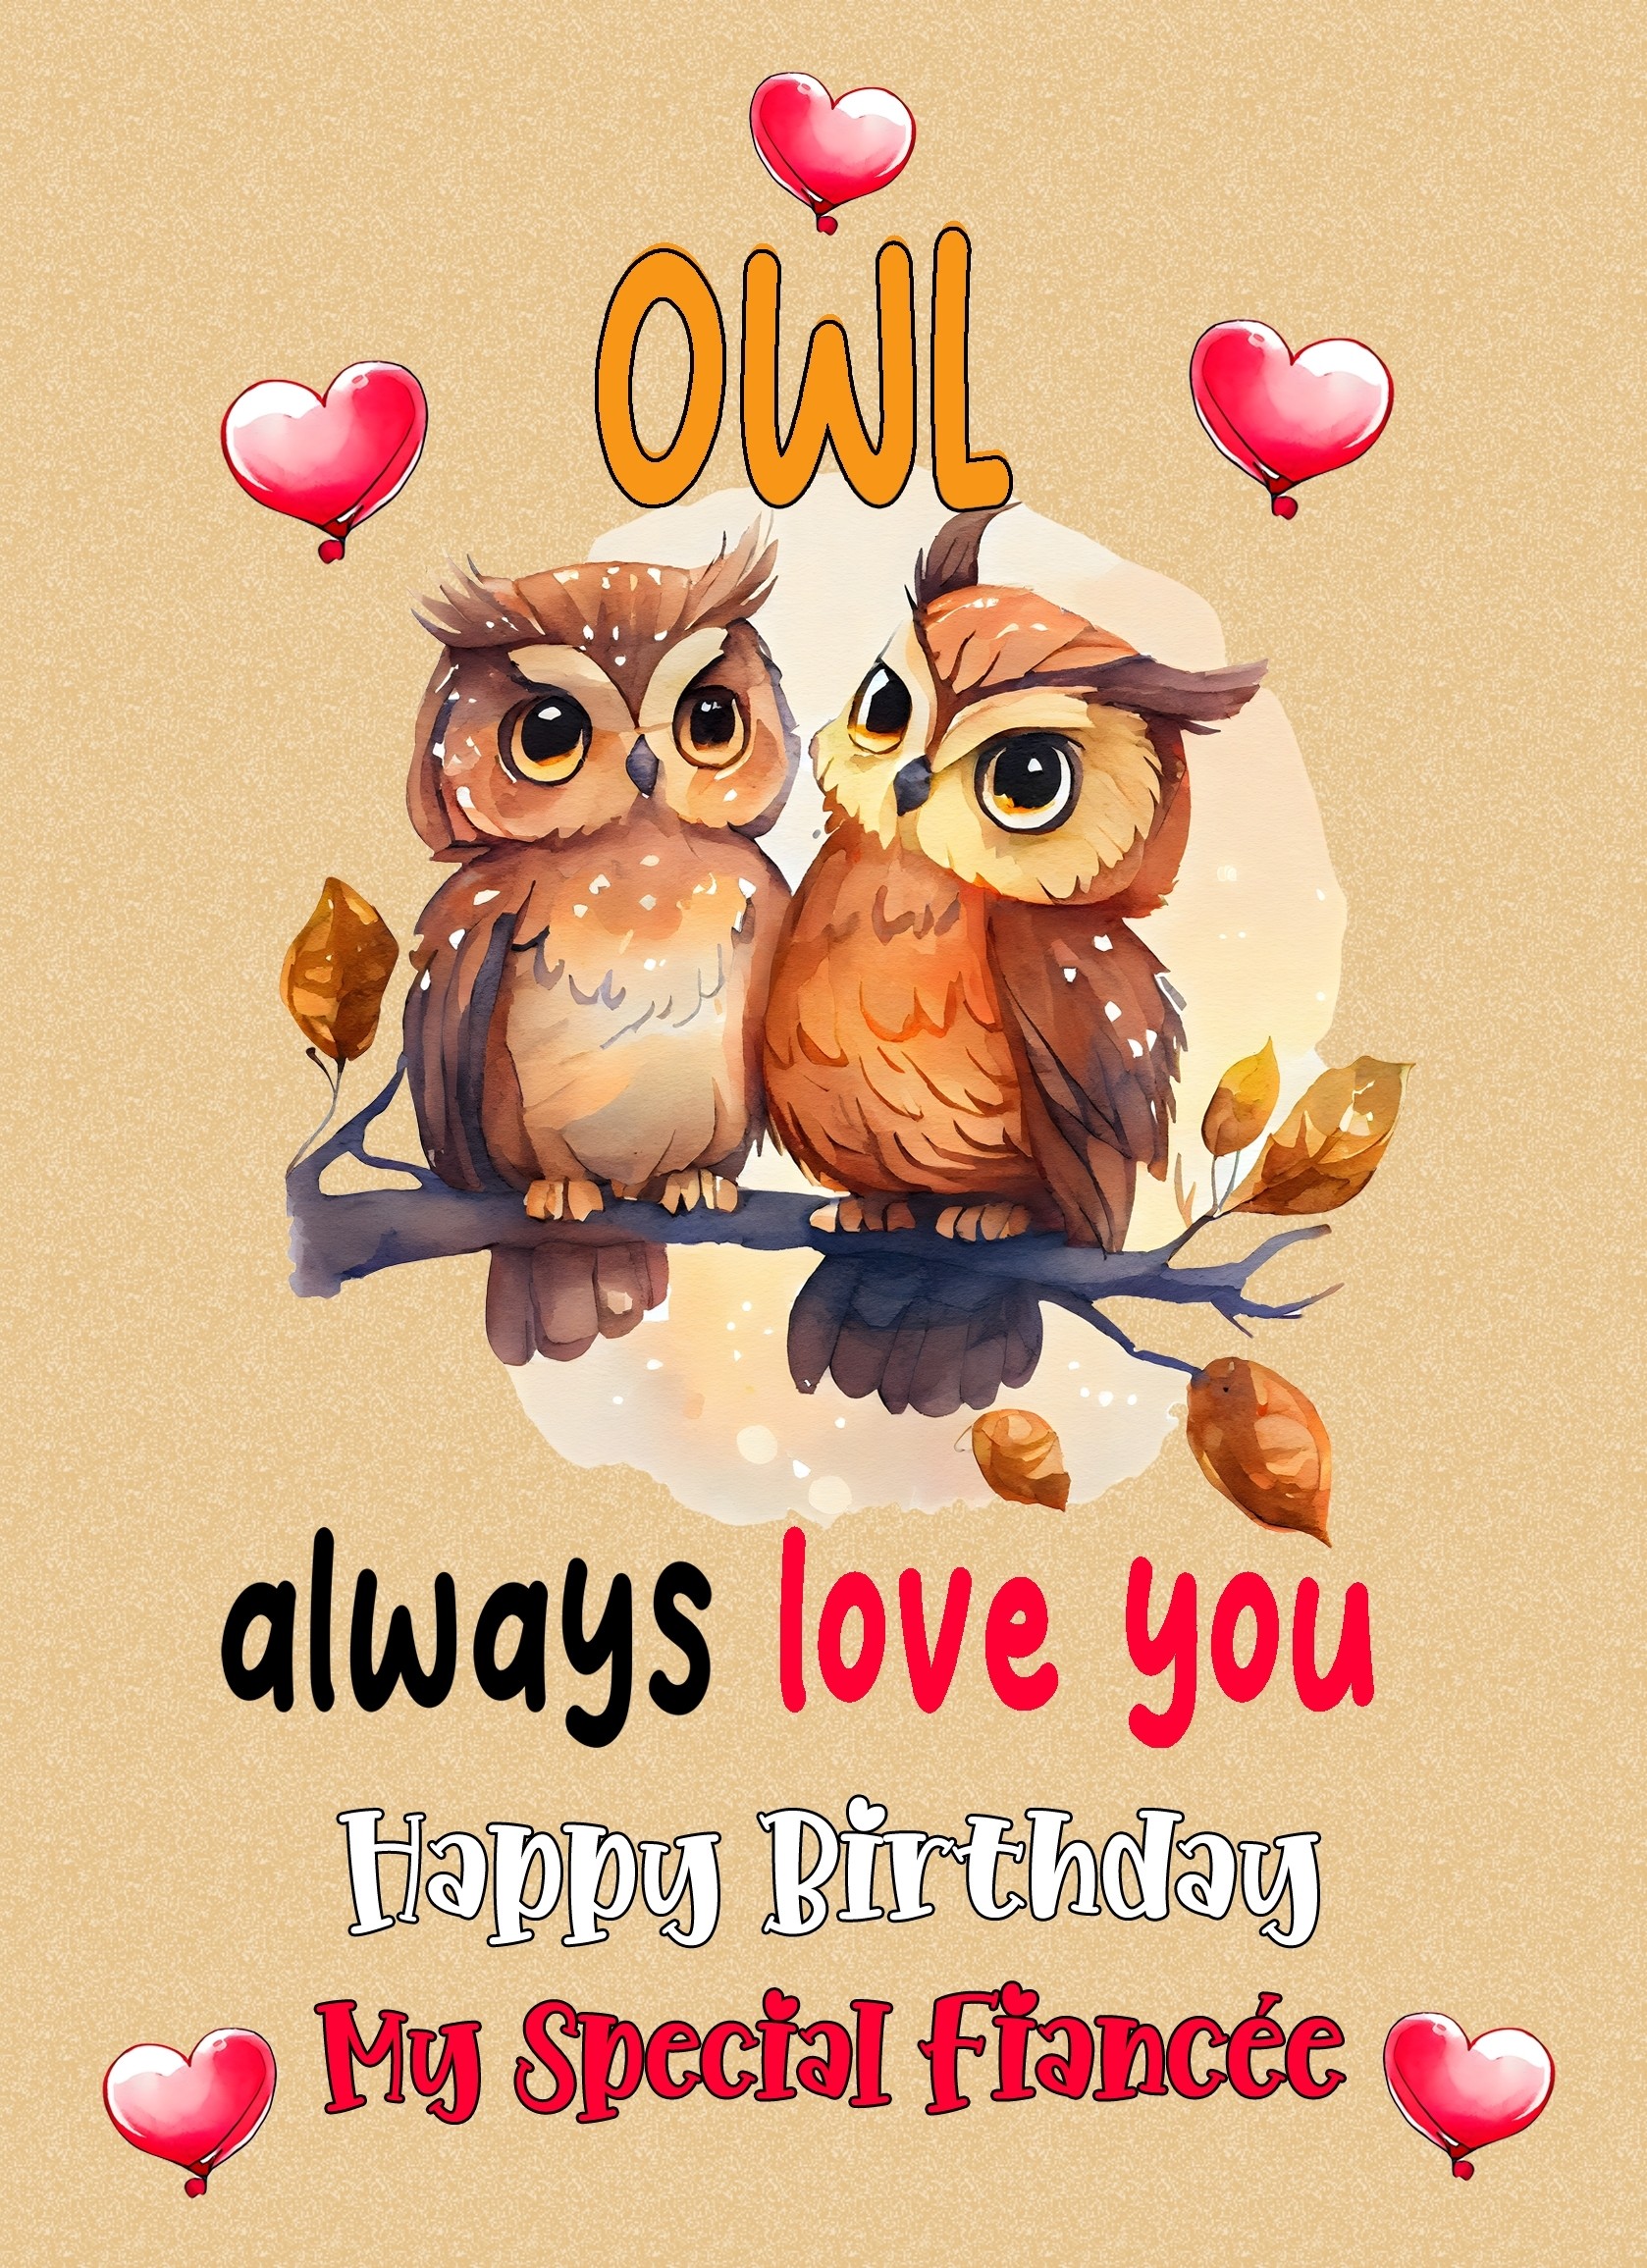 Funny Pun Romantic Birthday Card for Fiancee (Owl Always Love You)